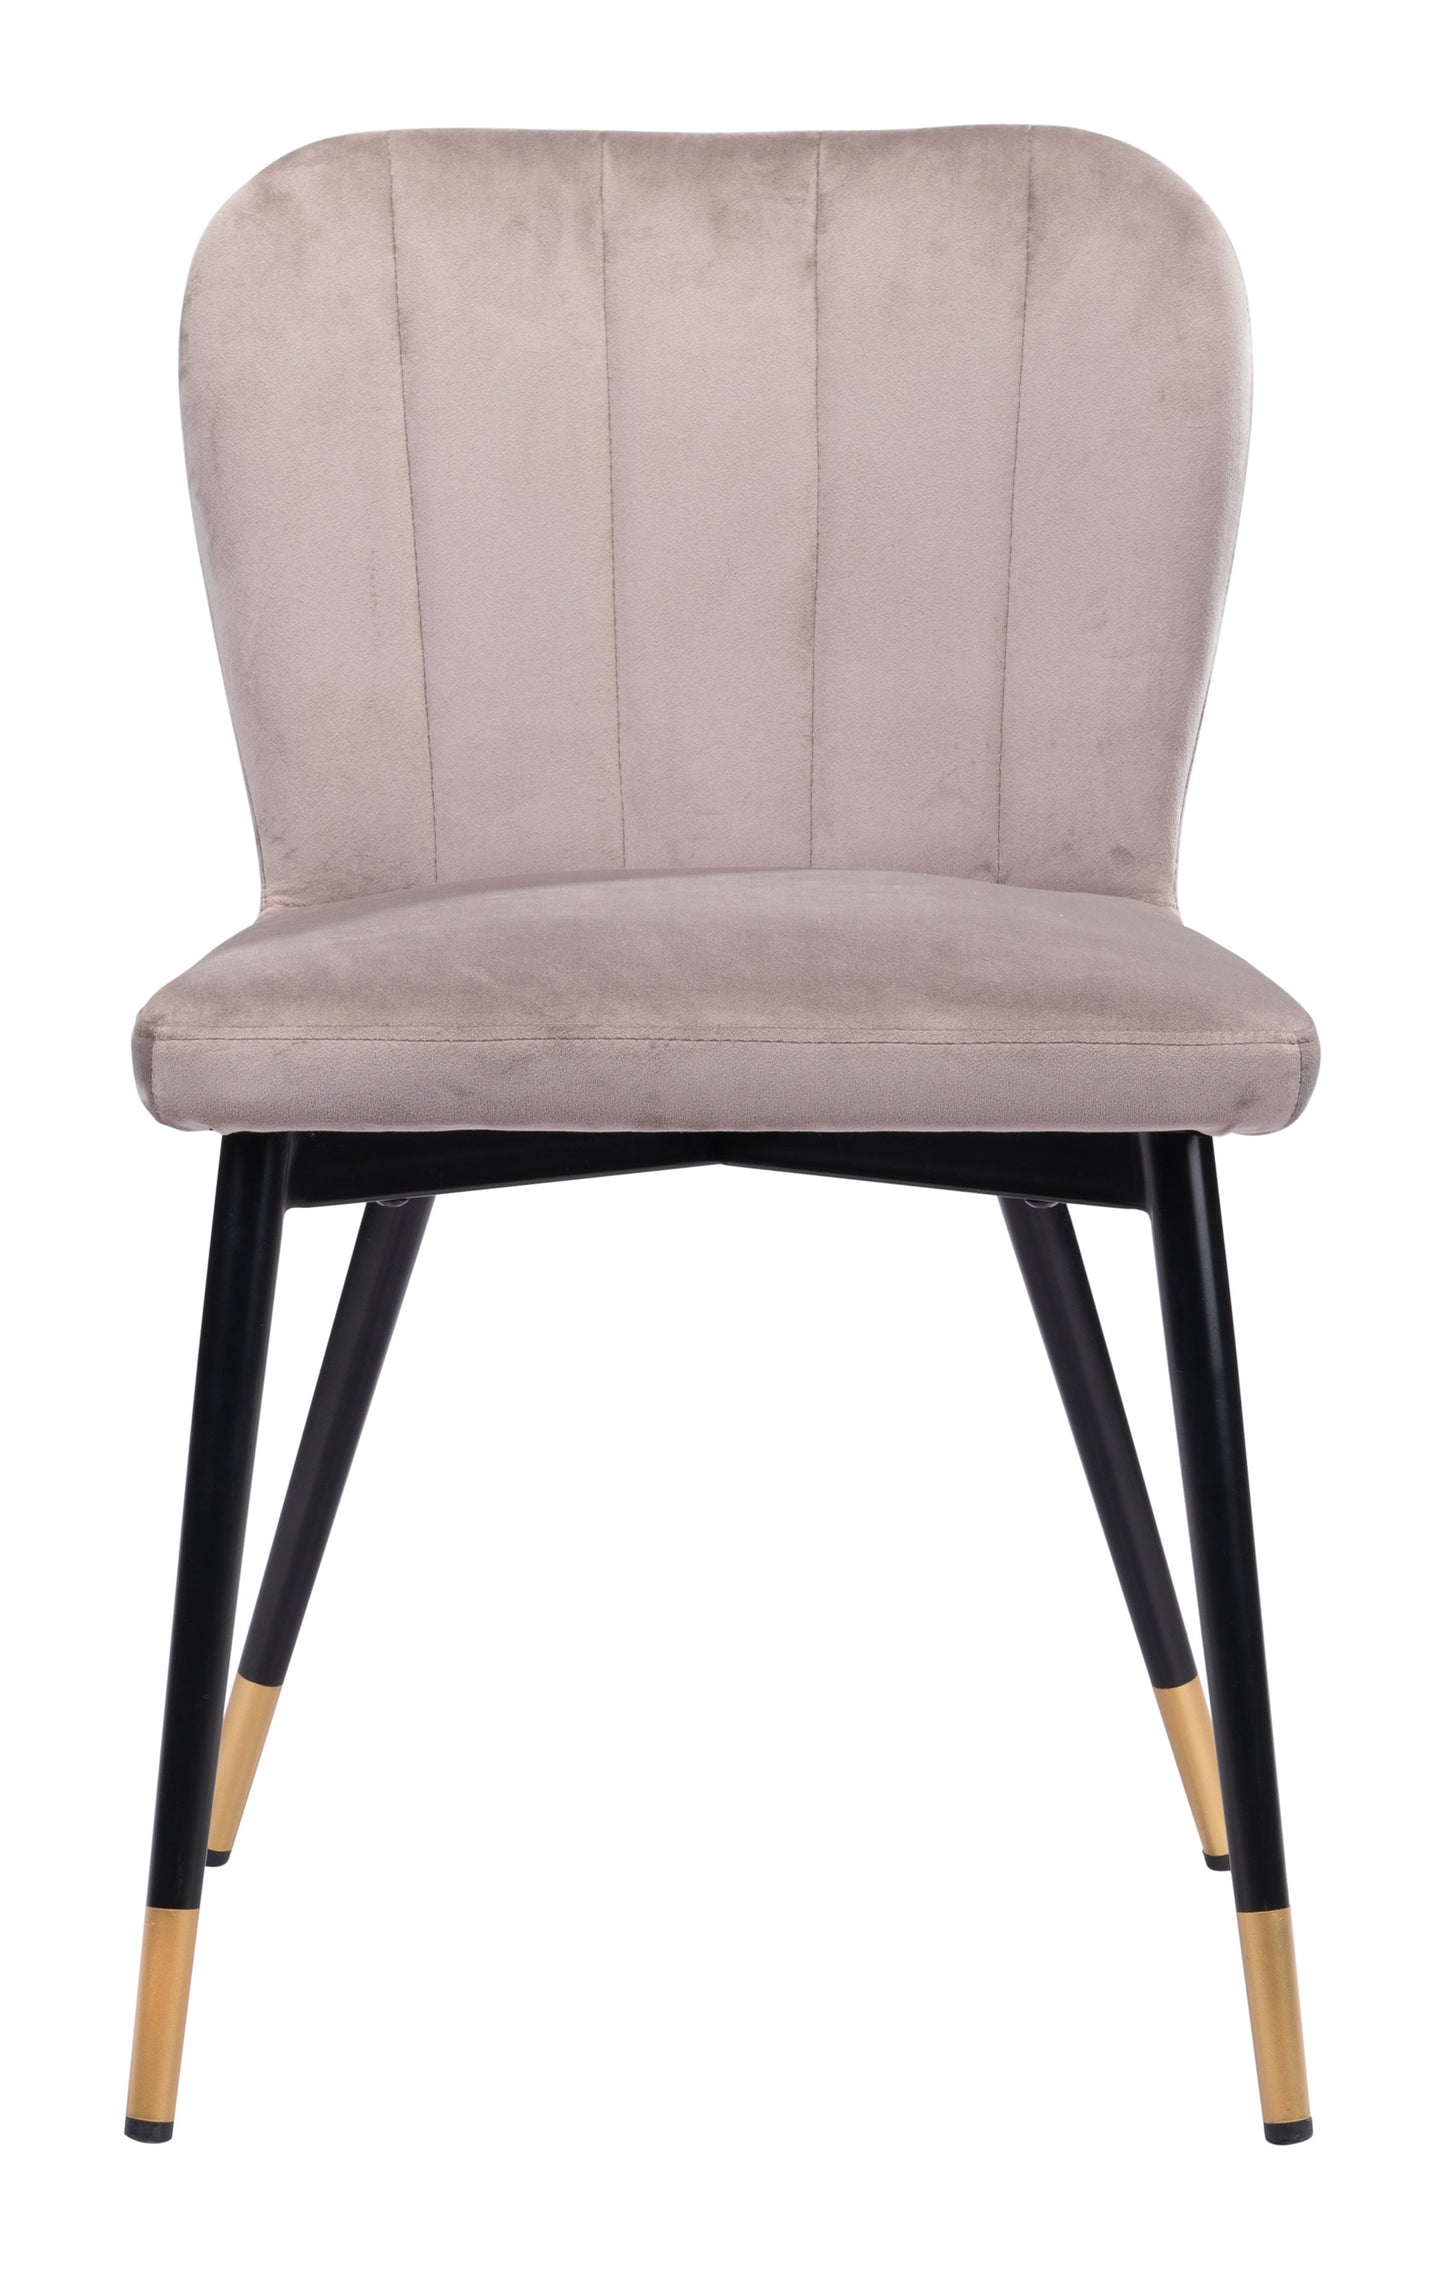 Manchester Dining Chair (Set of 2)